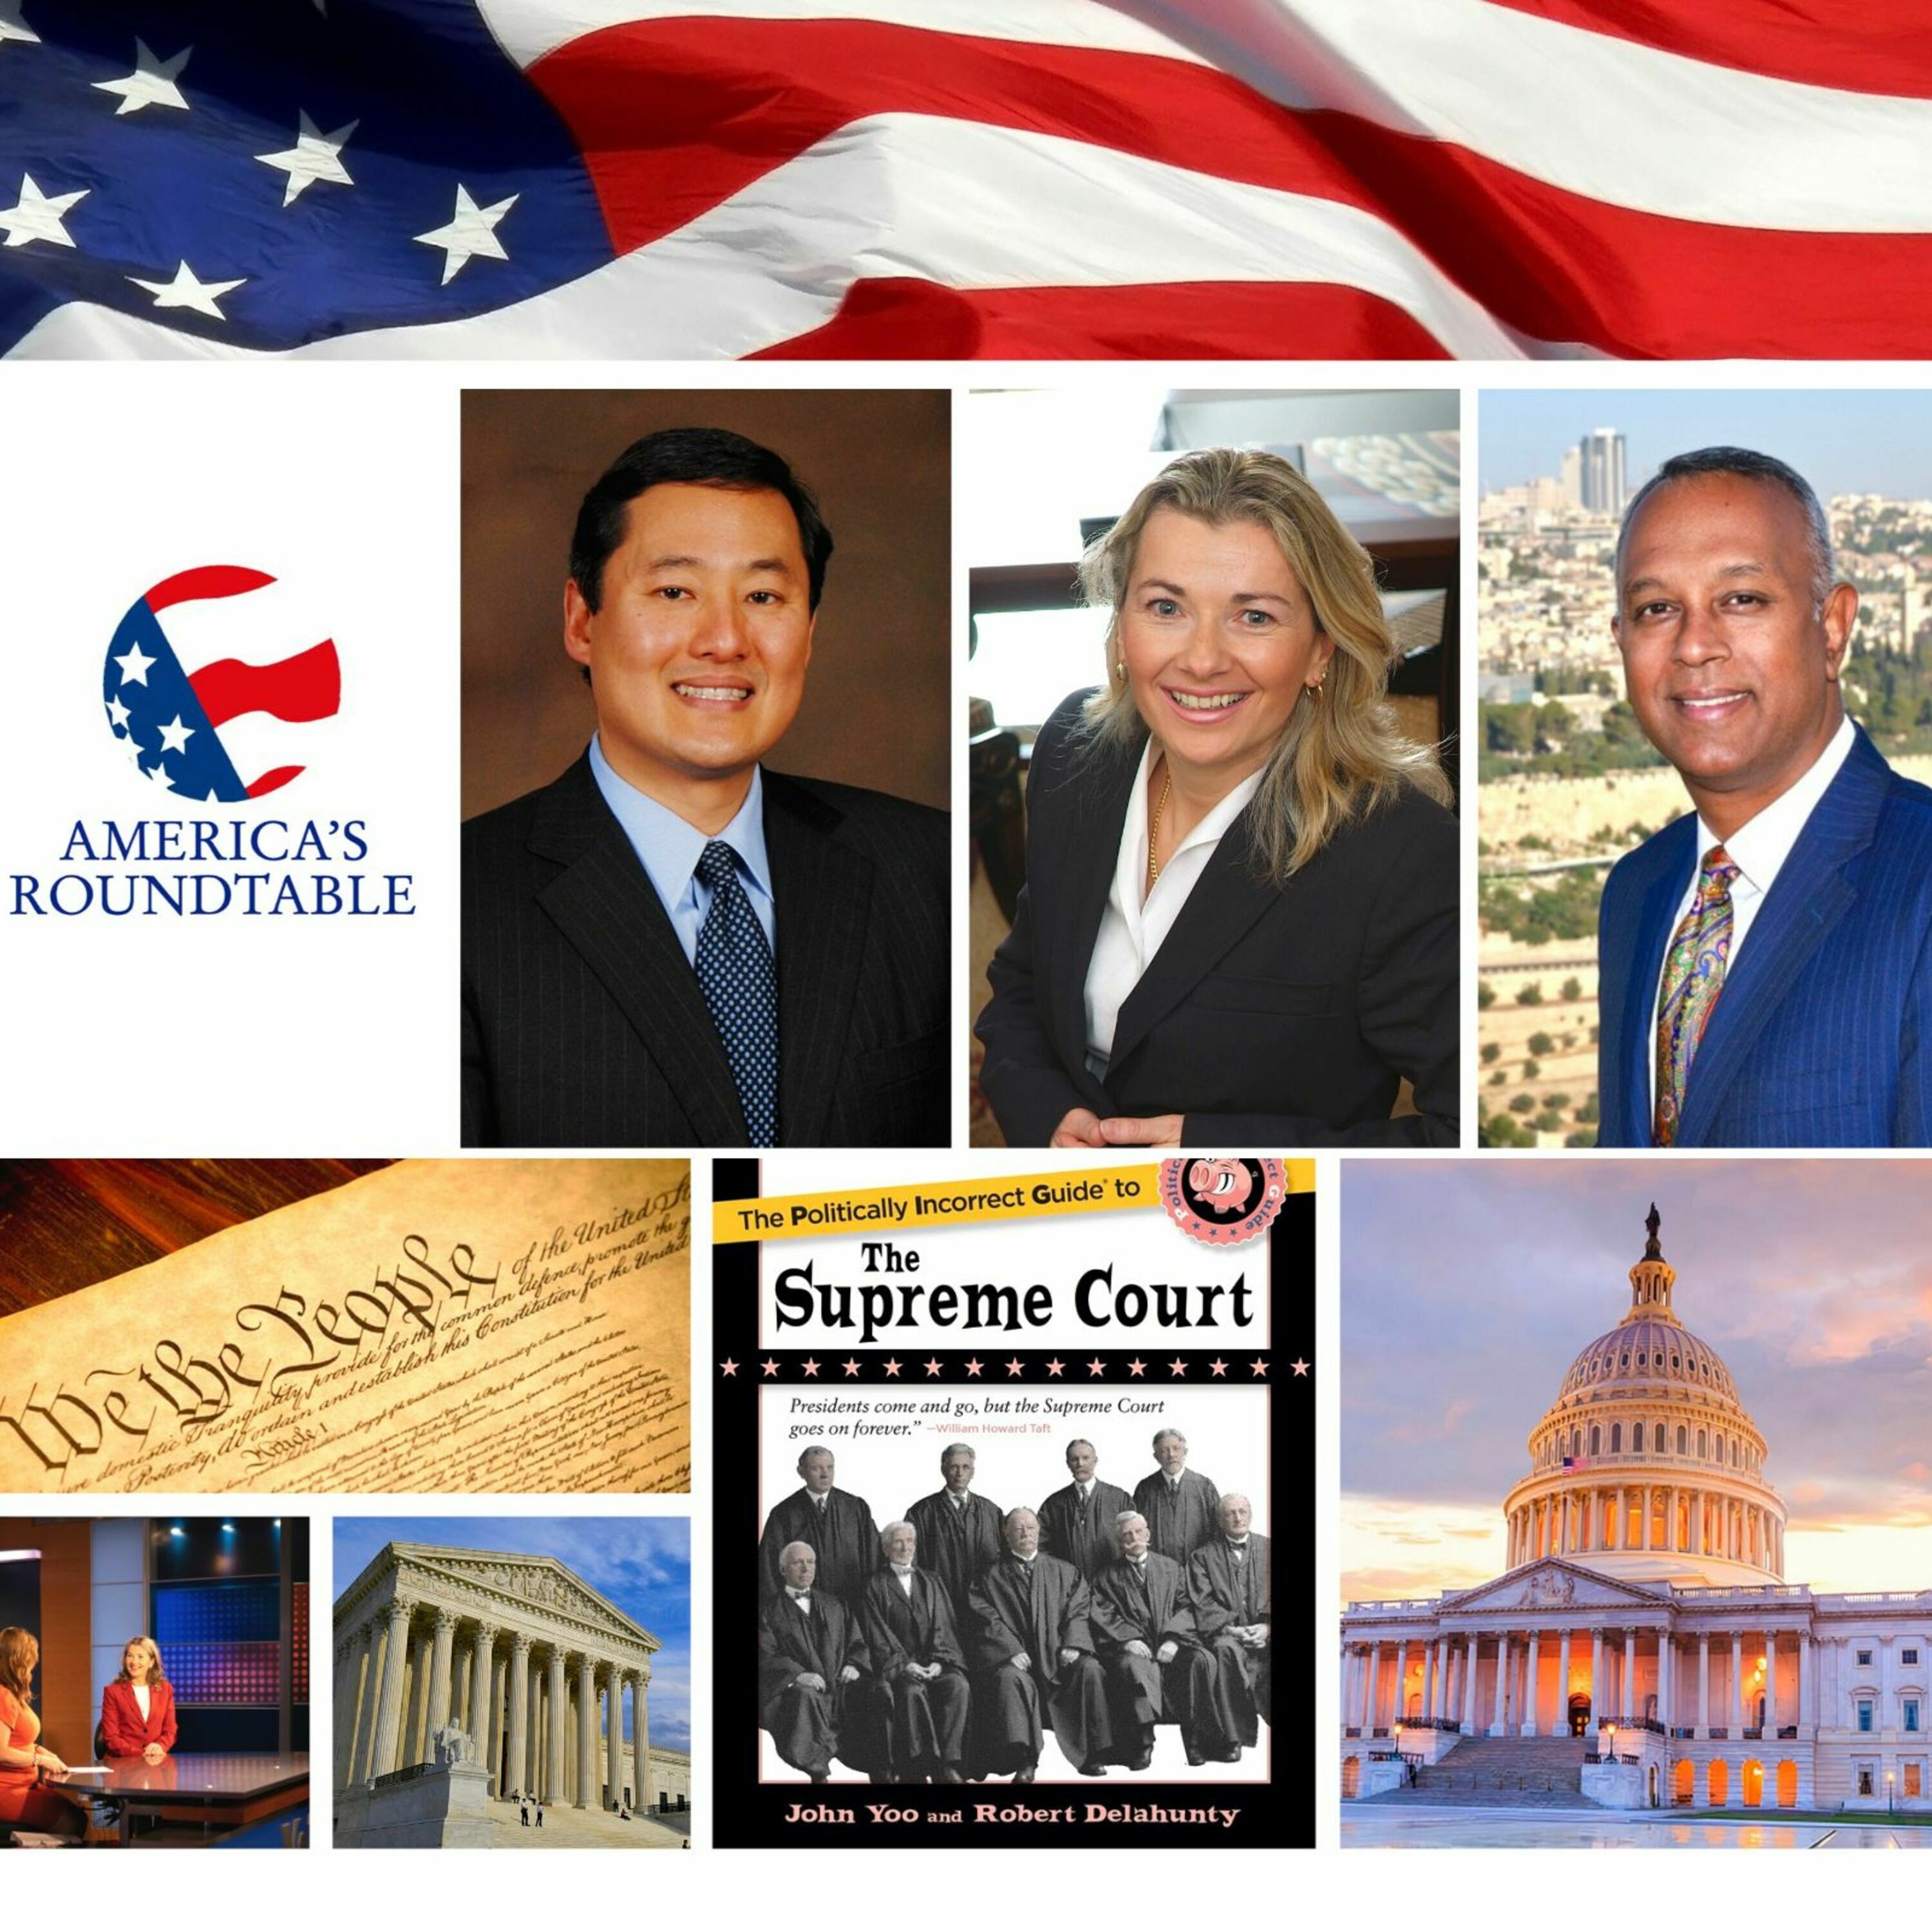 A Conversation with John Yoo | The Supreme Court's Three Ringing Blows for Liberty | Freedom of Speech | Congressional Power of the Purse | Striking Down Race-Based Affirmative Action